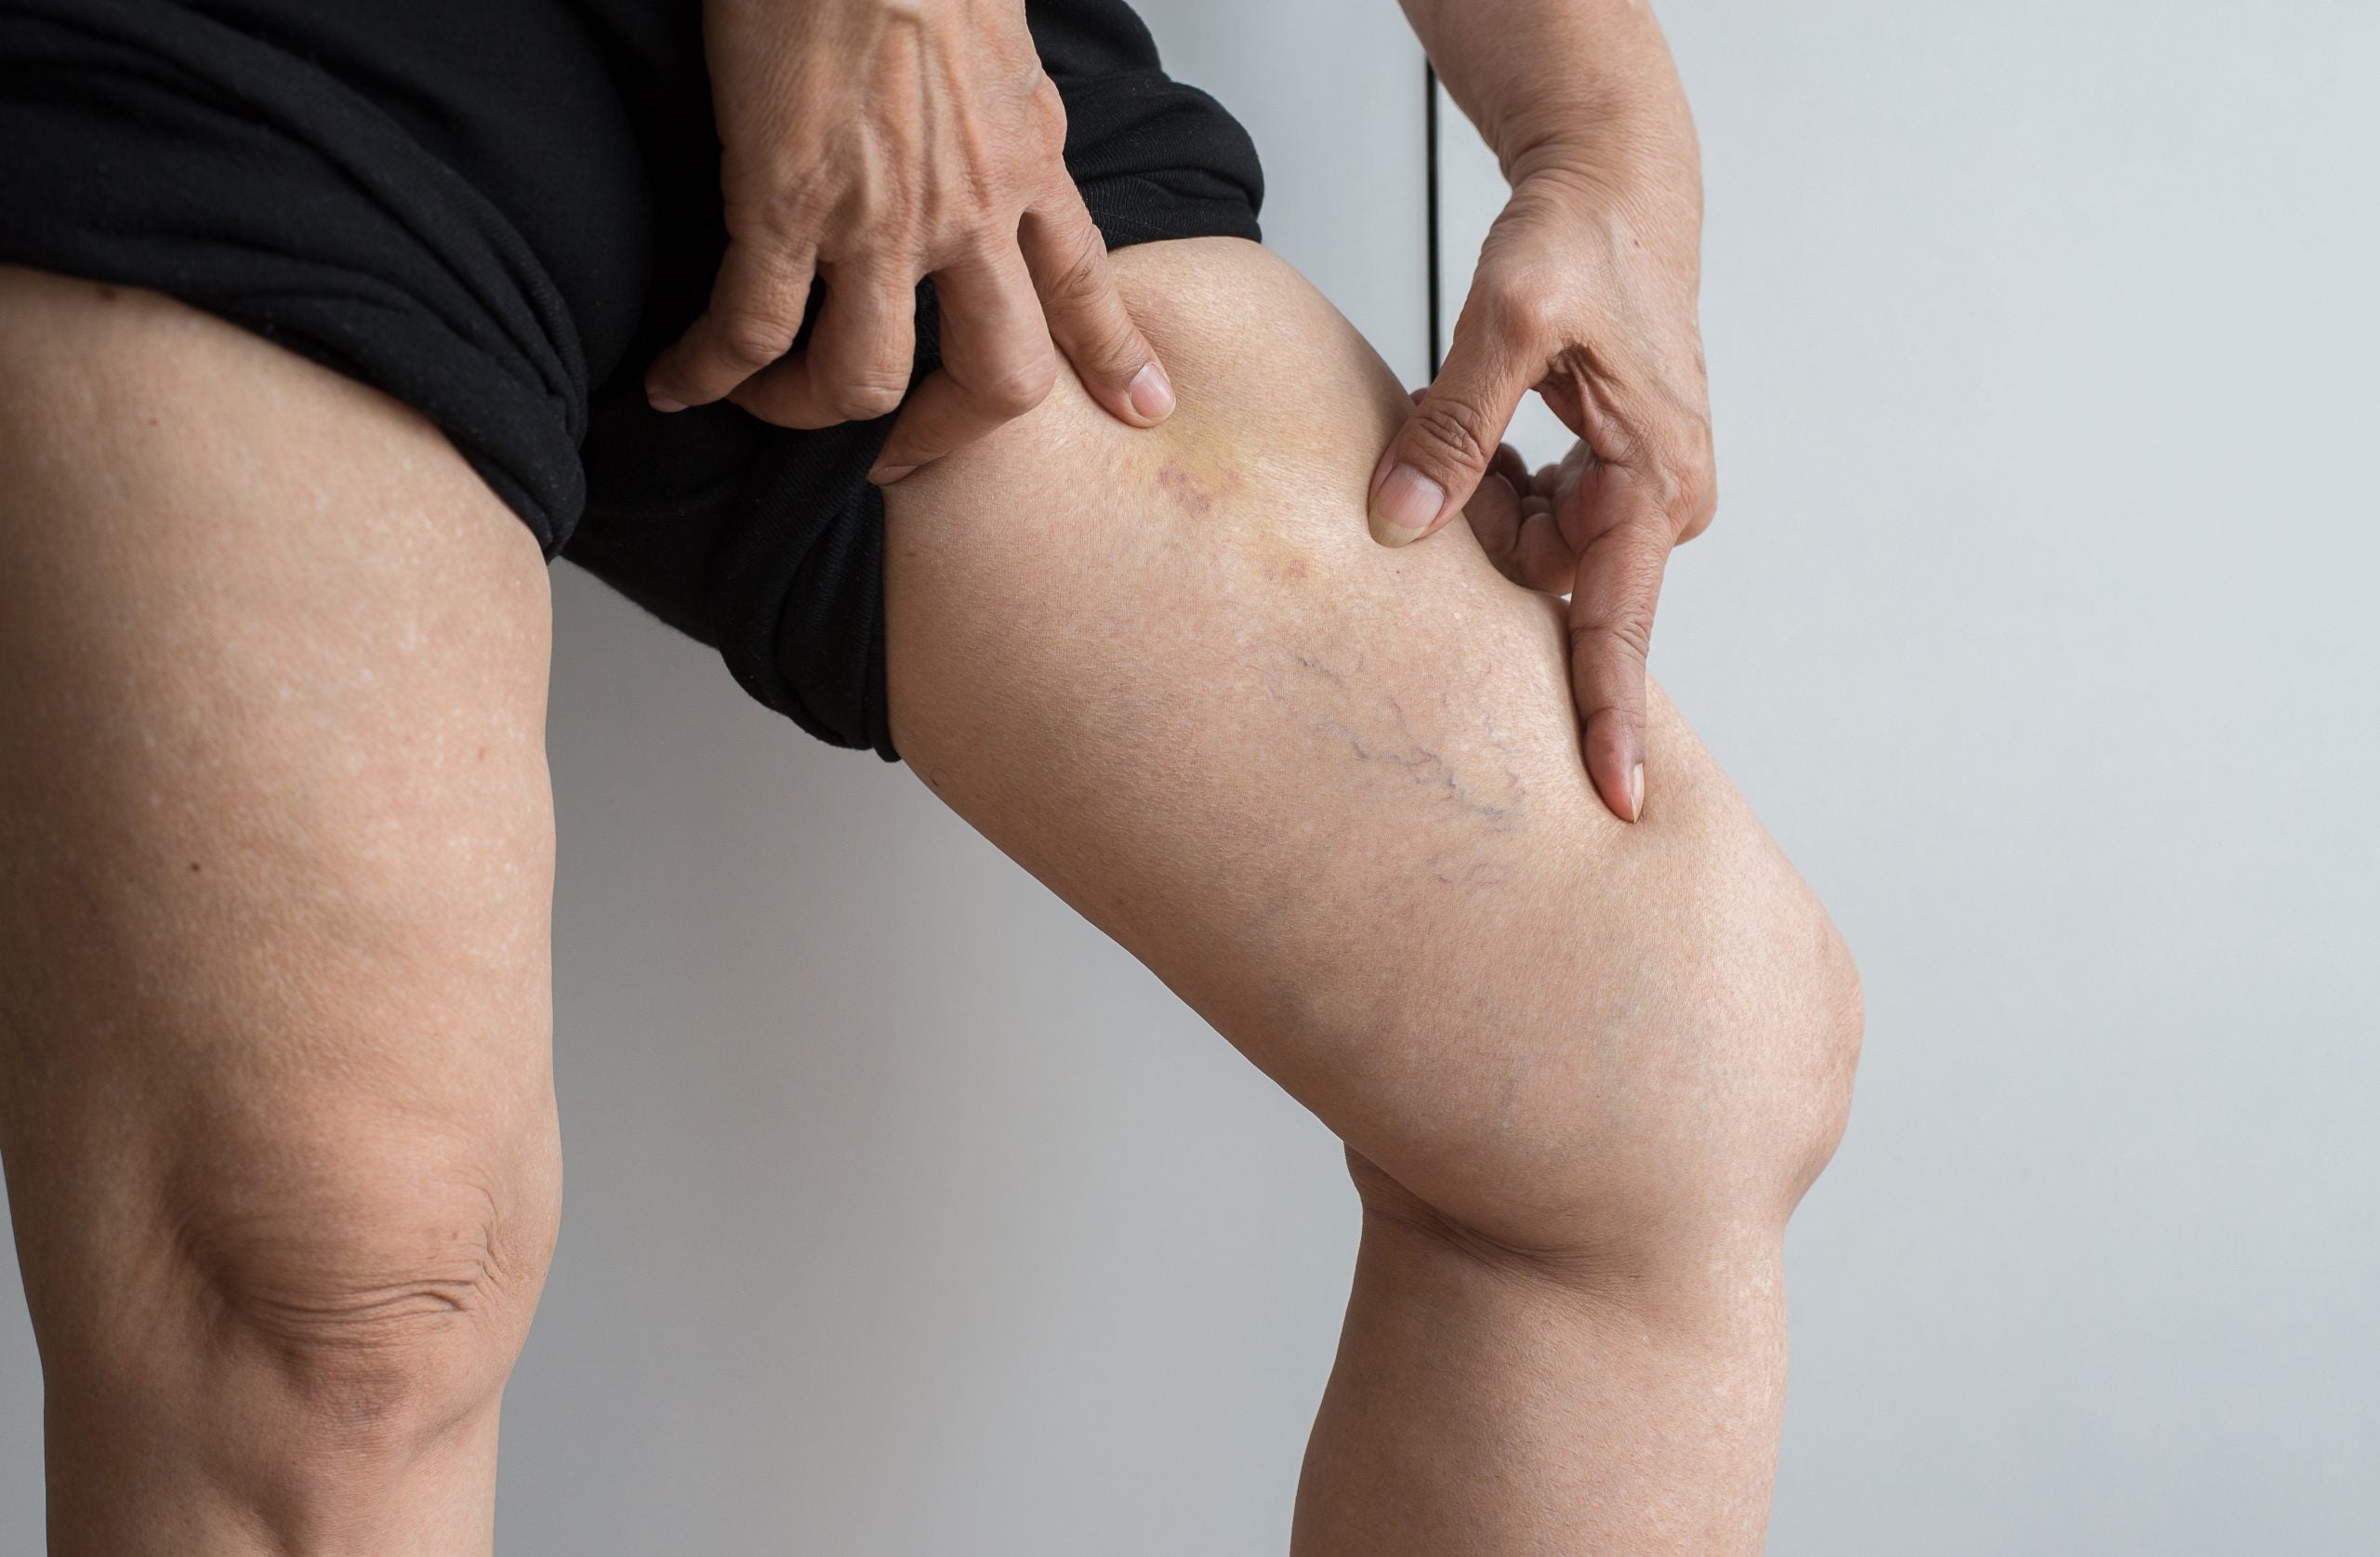 How Can I Prevent Spider Veins and Varicose Veins? - Vantage